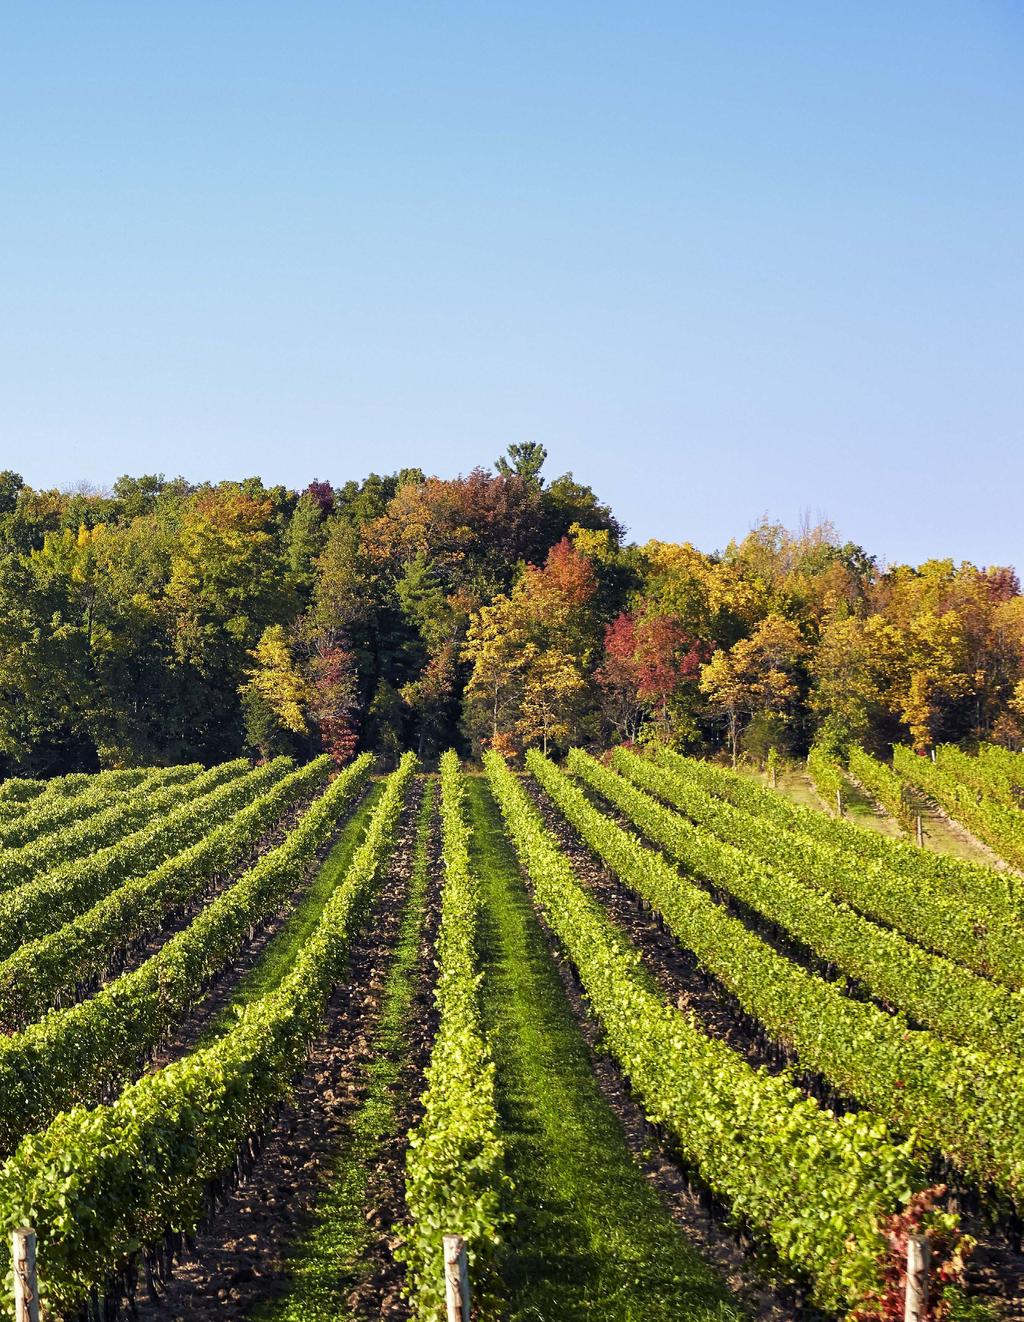 Ontario Wine and Grape Industry Performance Study 2016 Performed by VQA Ontario and